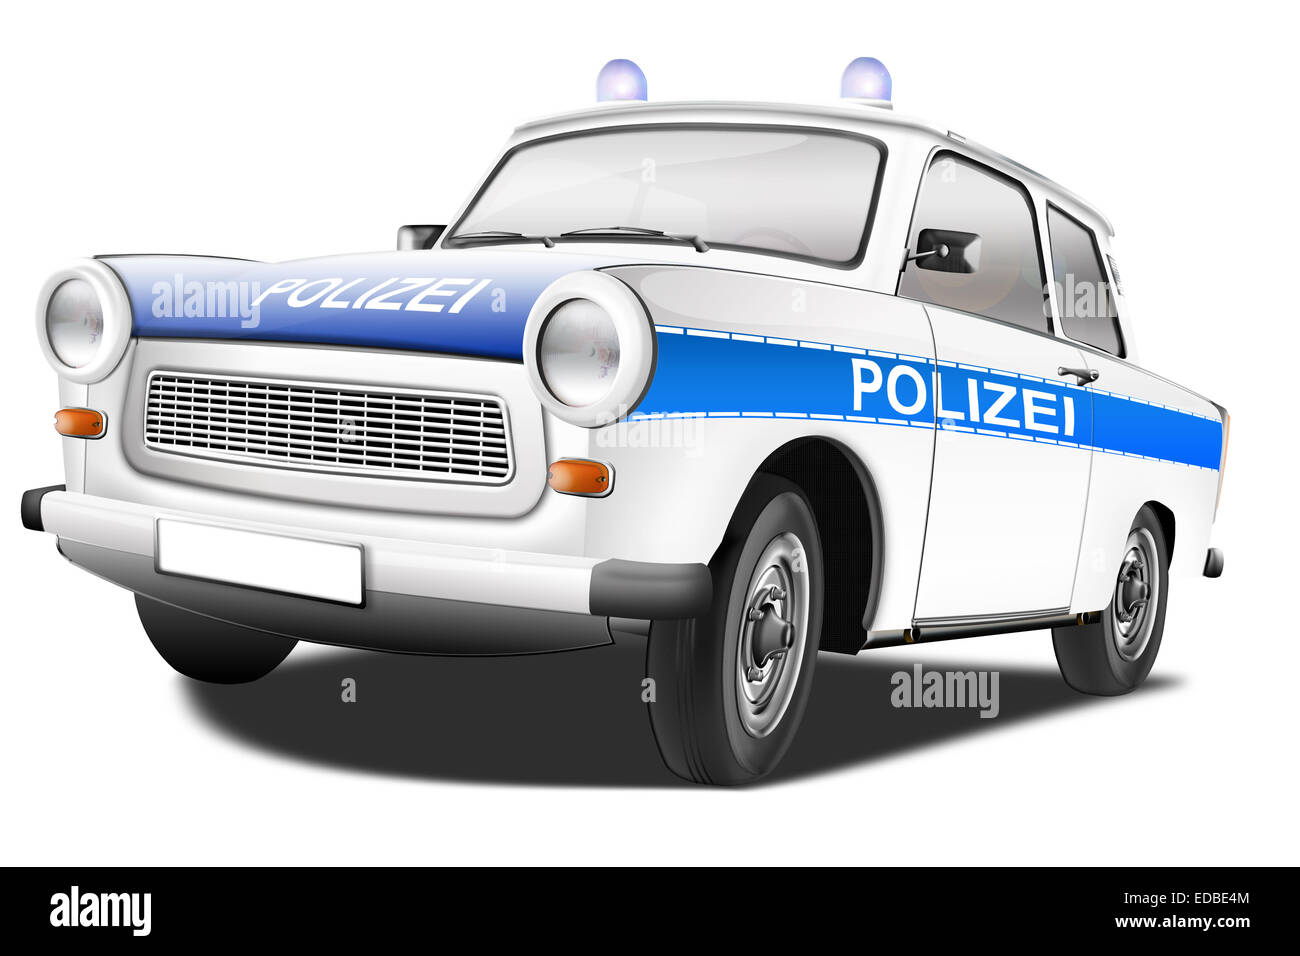 Trabant 601 as a police car, illustration Stock Photo